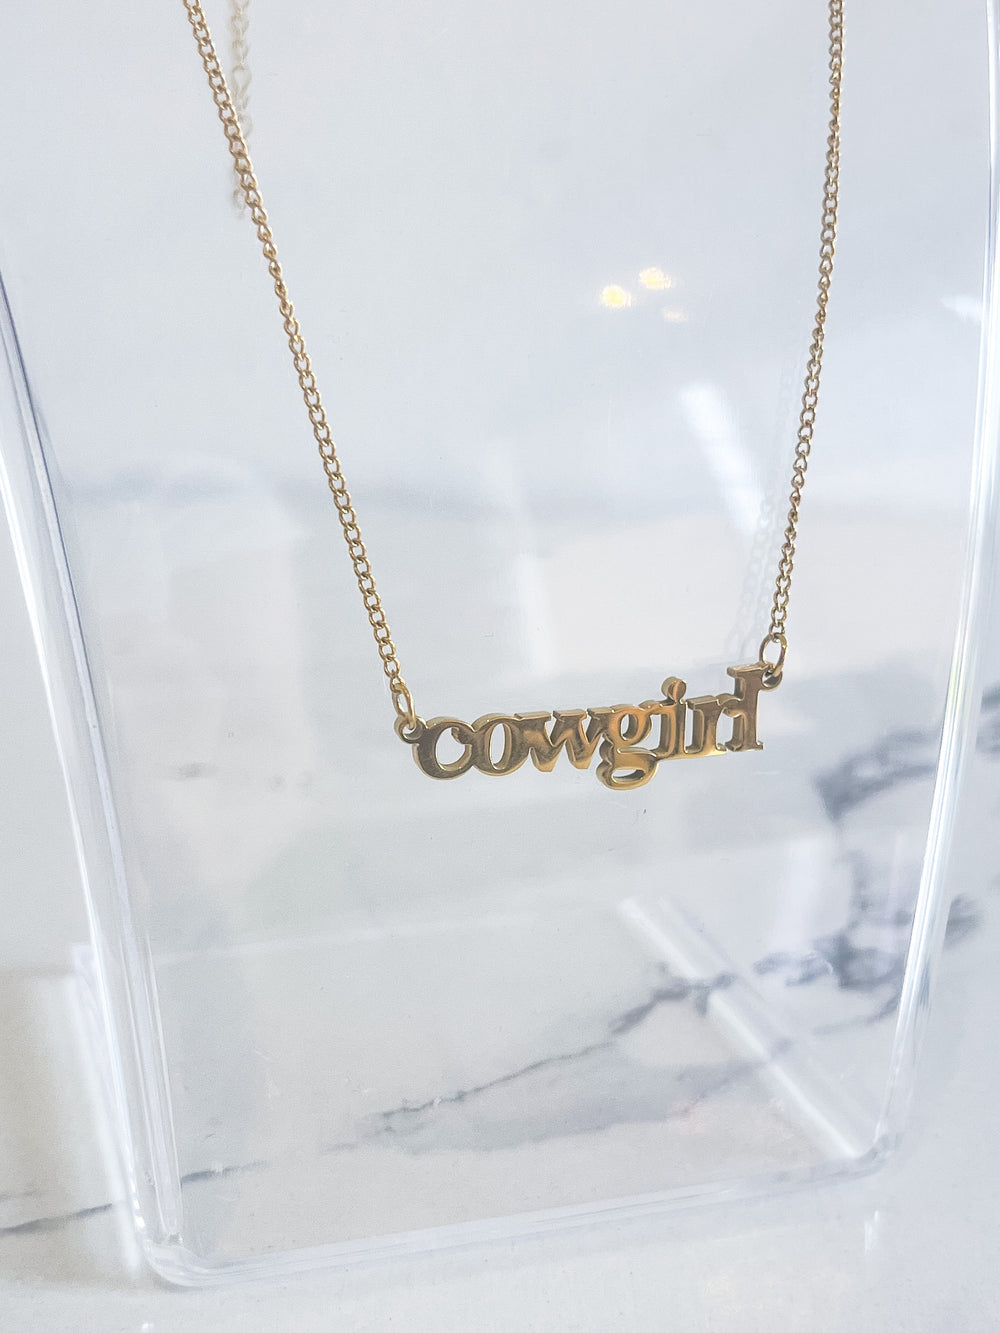 WS 630 Jewelry - COWGIRL Gold Necklace